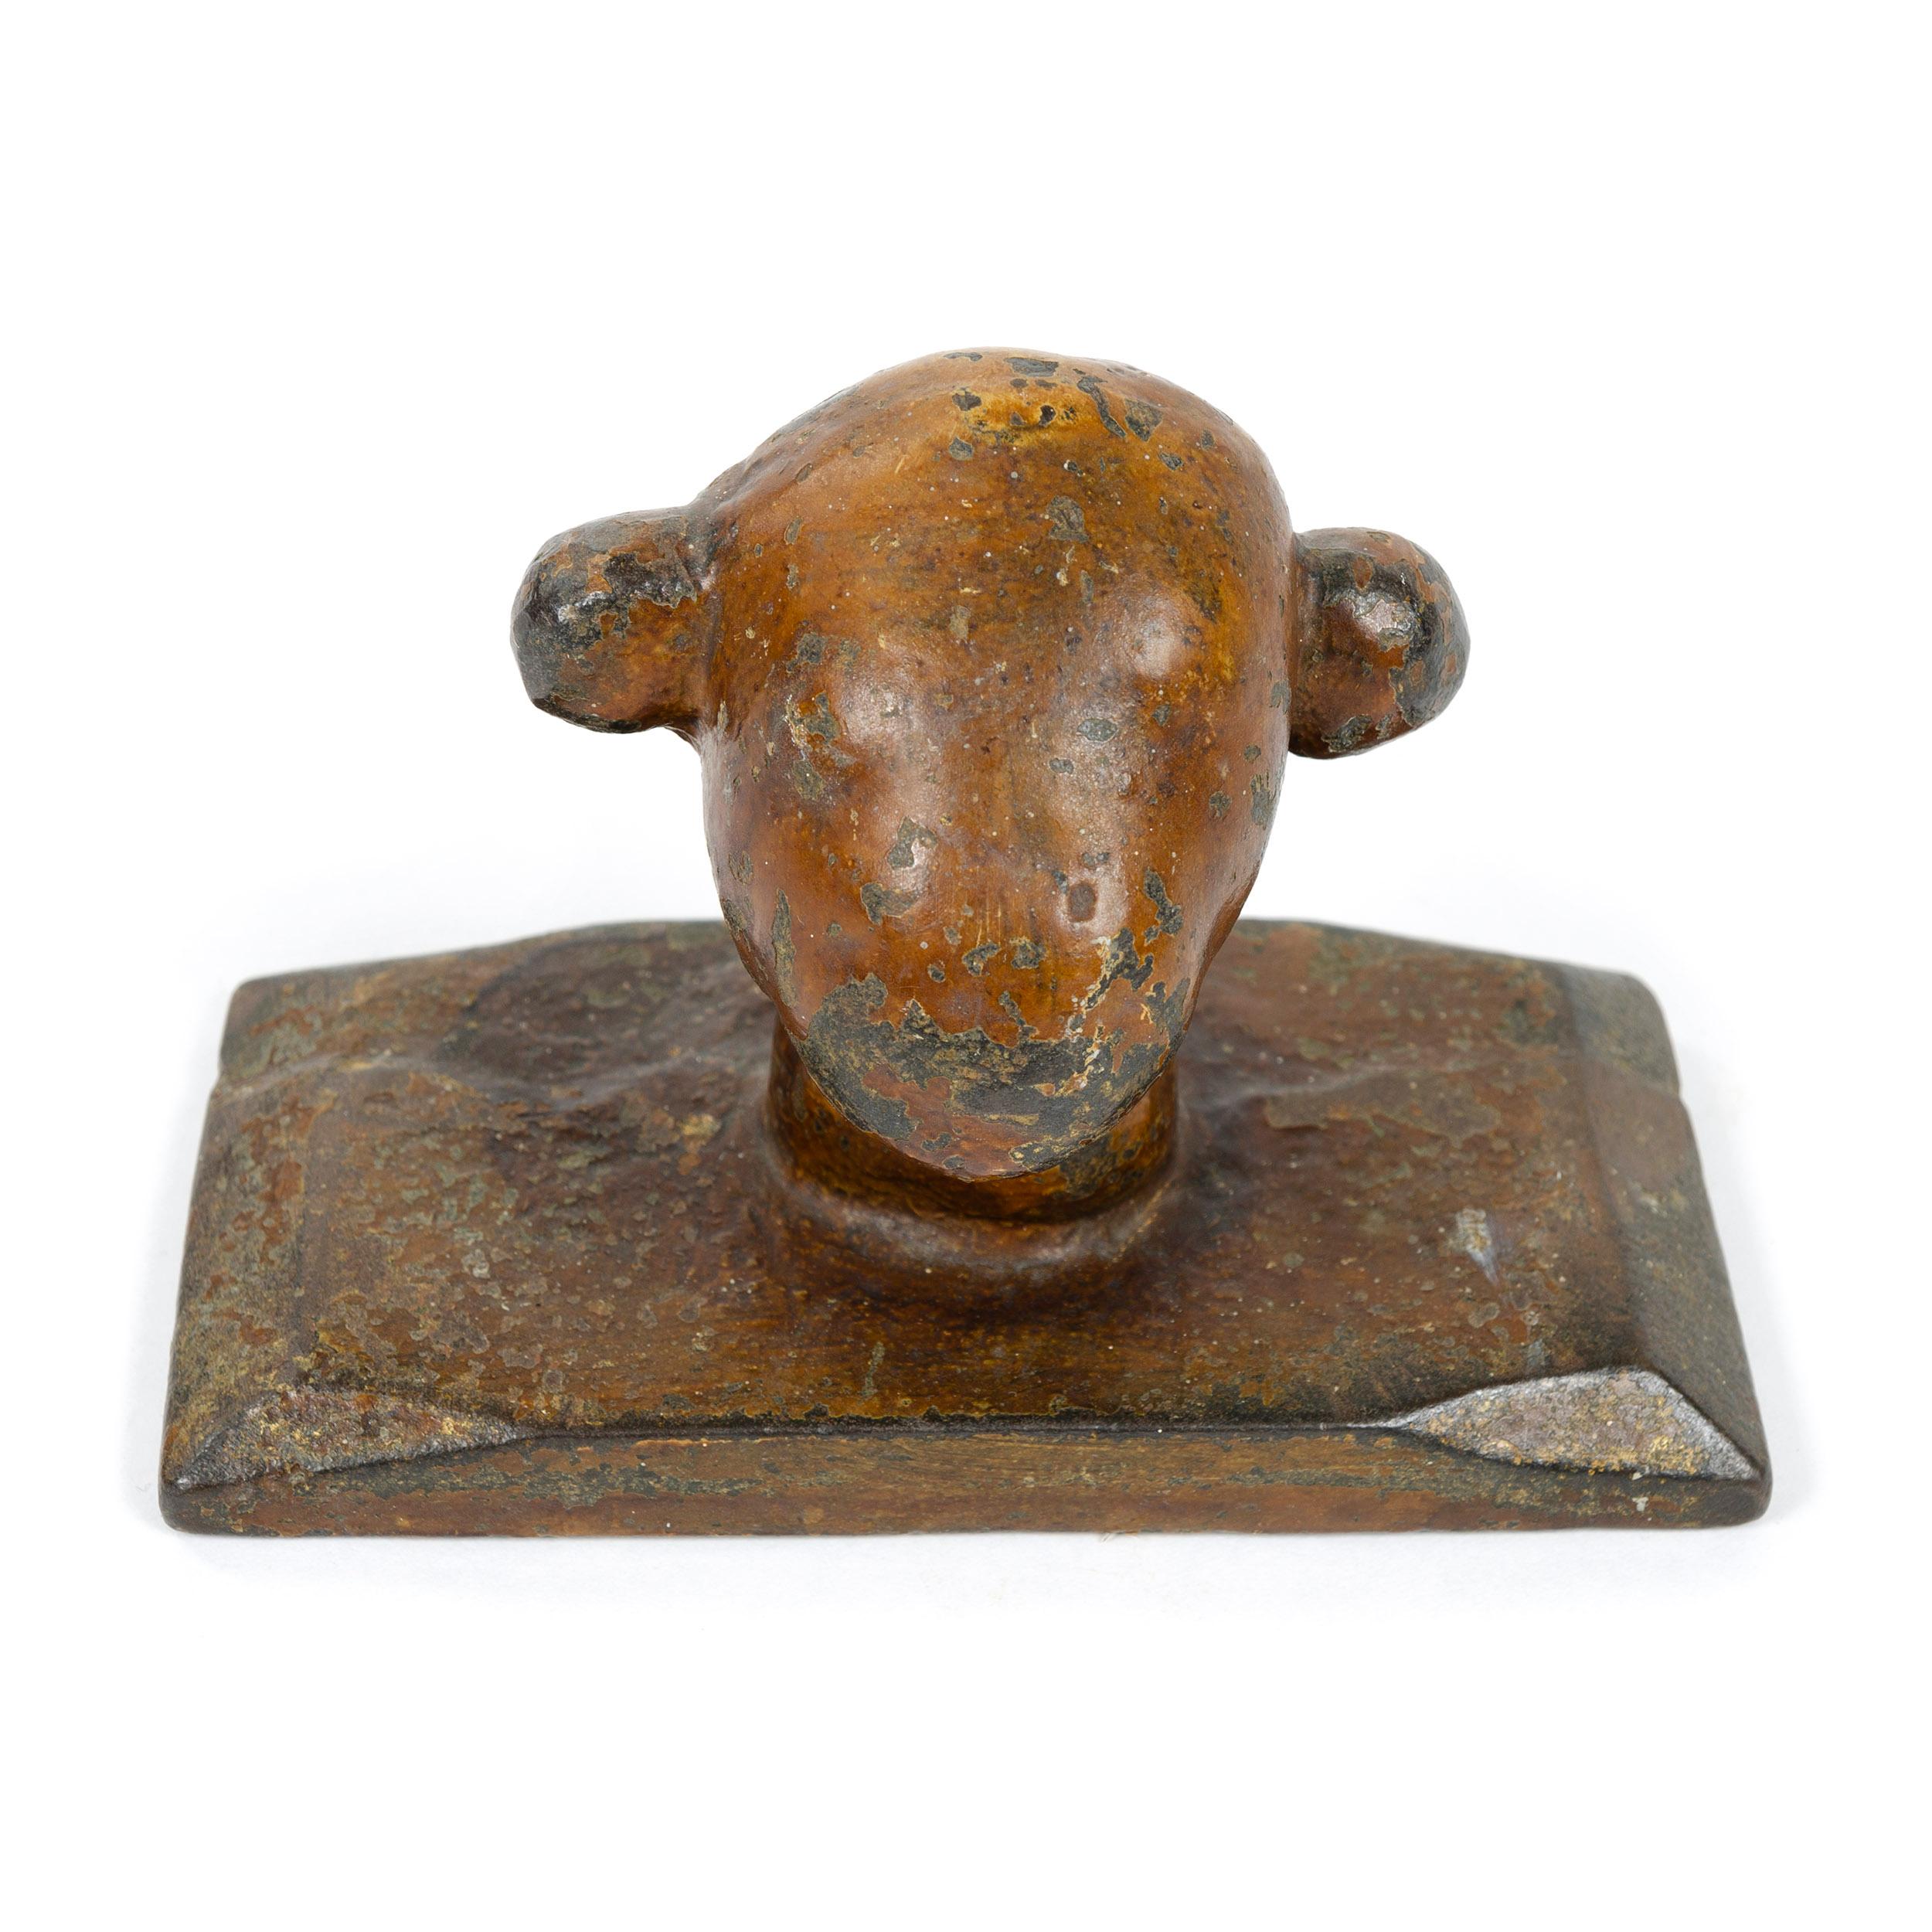 An antique, whimsical iron paperweight of substantial size and heft with a natural, medium to darker brown patina which shows appropriate signs of warmth and age. Best described as a stylized animal head, likely a lamb, joined to a rectangular iron